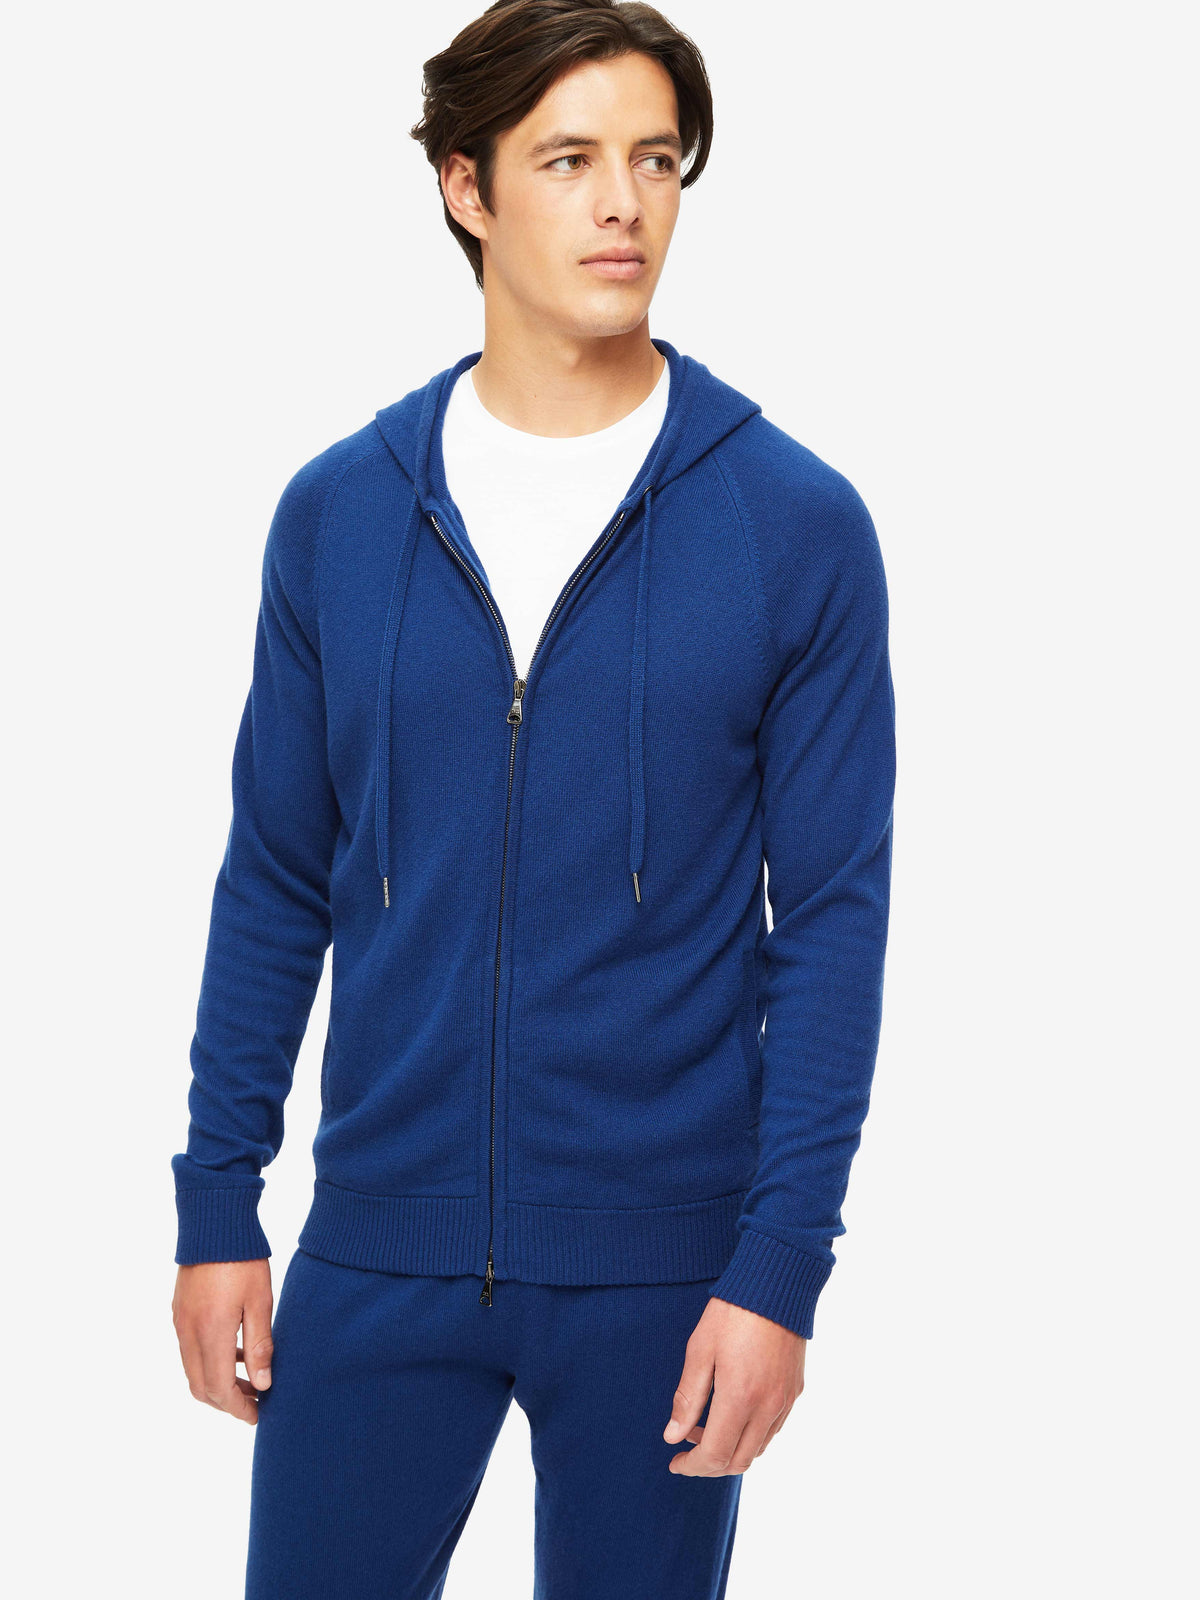 Men's Hoodie Finley Cashmere Electric Blue